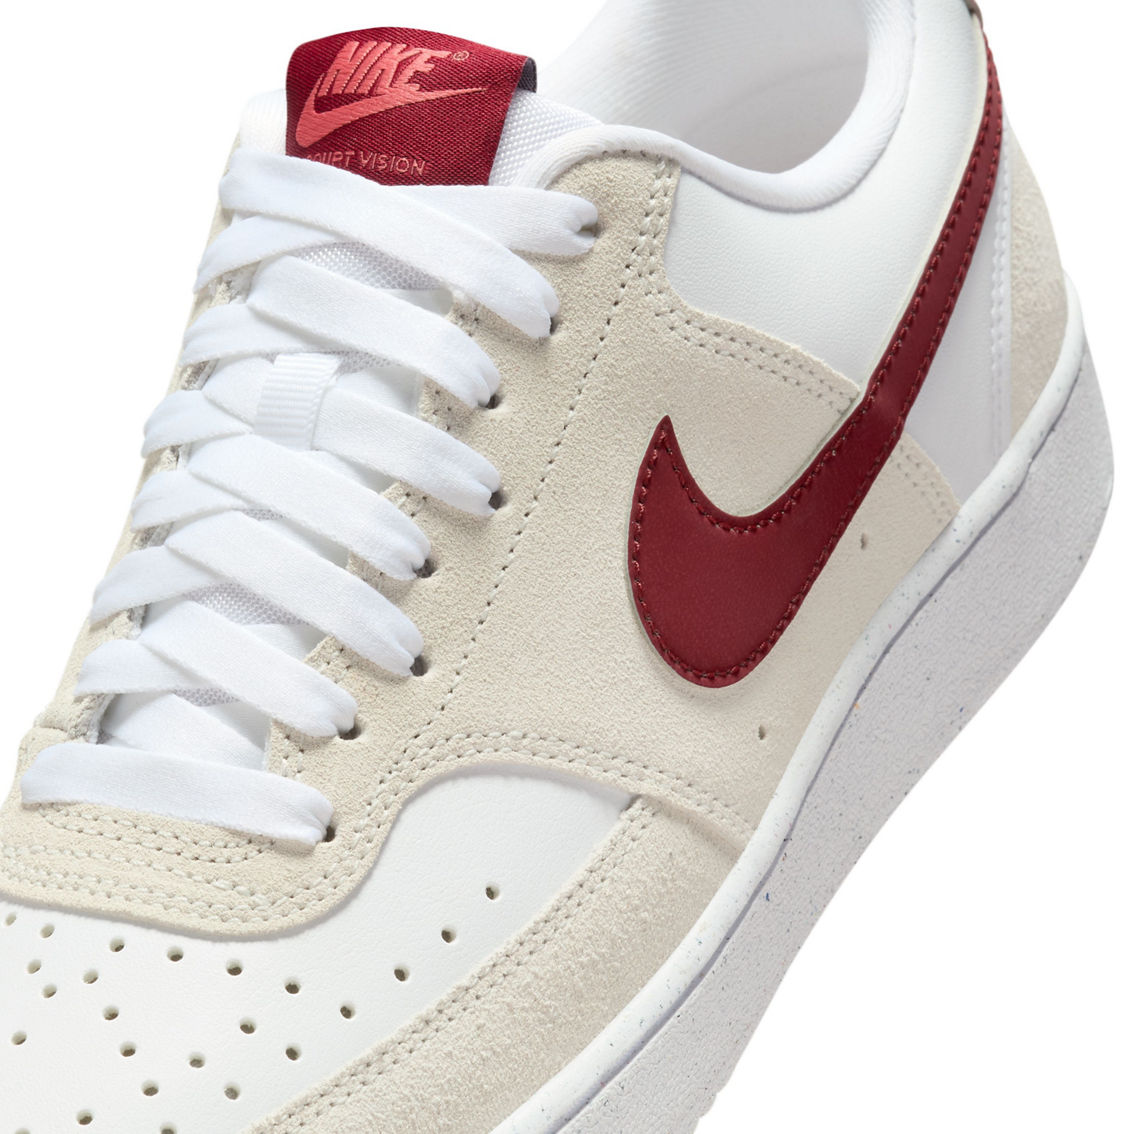 Nike Women's Court Vision Low Sneakers - Image 6 of 9